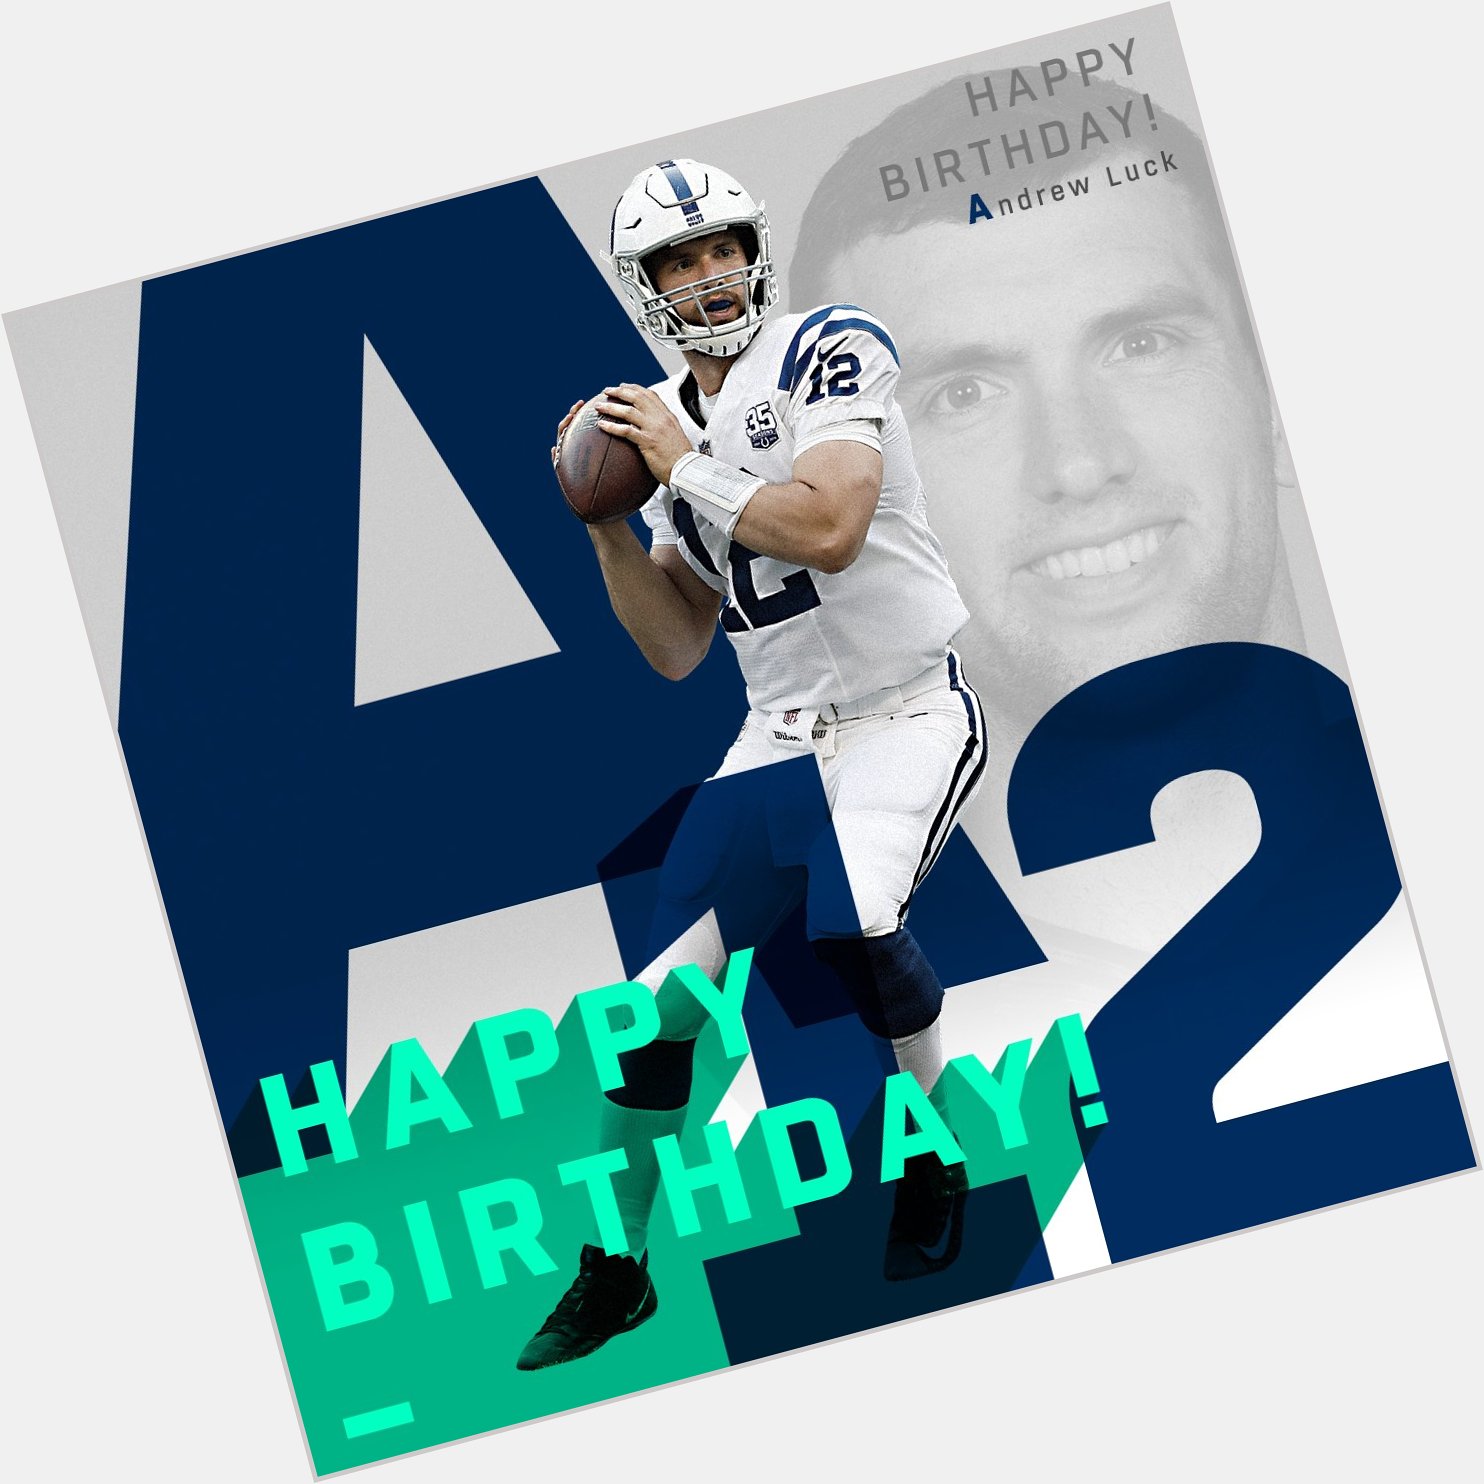 NFL : Join us in wishing Andrew Luck a HAPPY BIRTHDAY!  (via message 